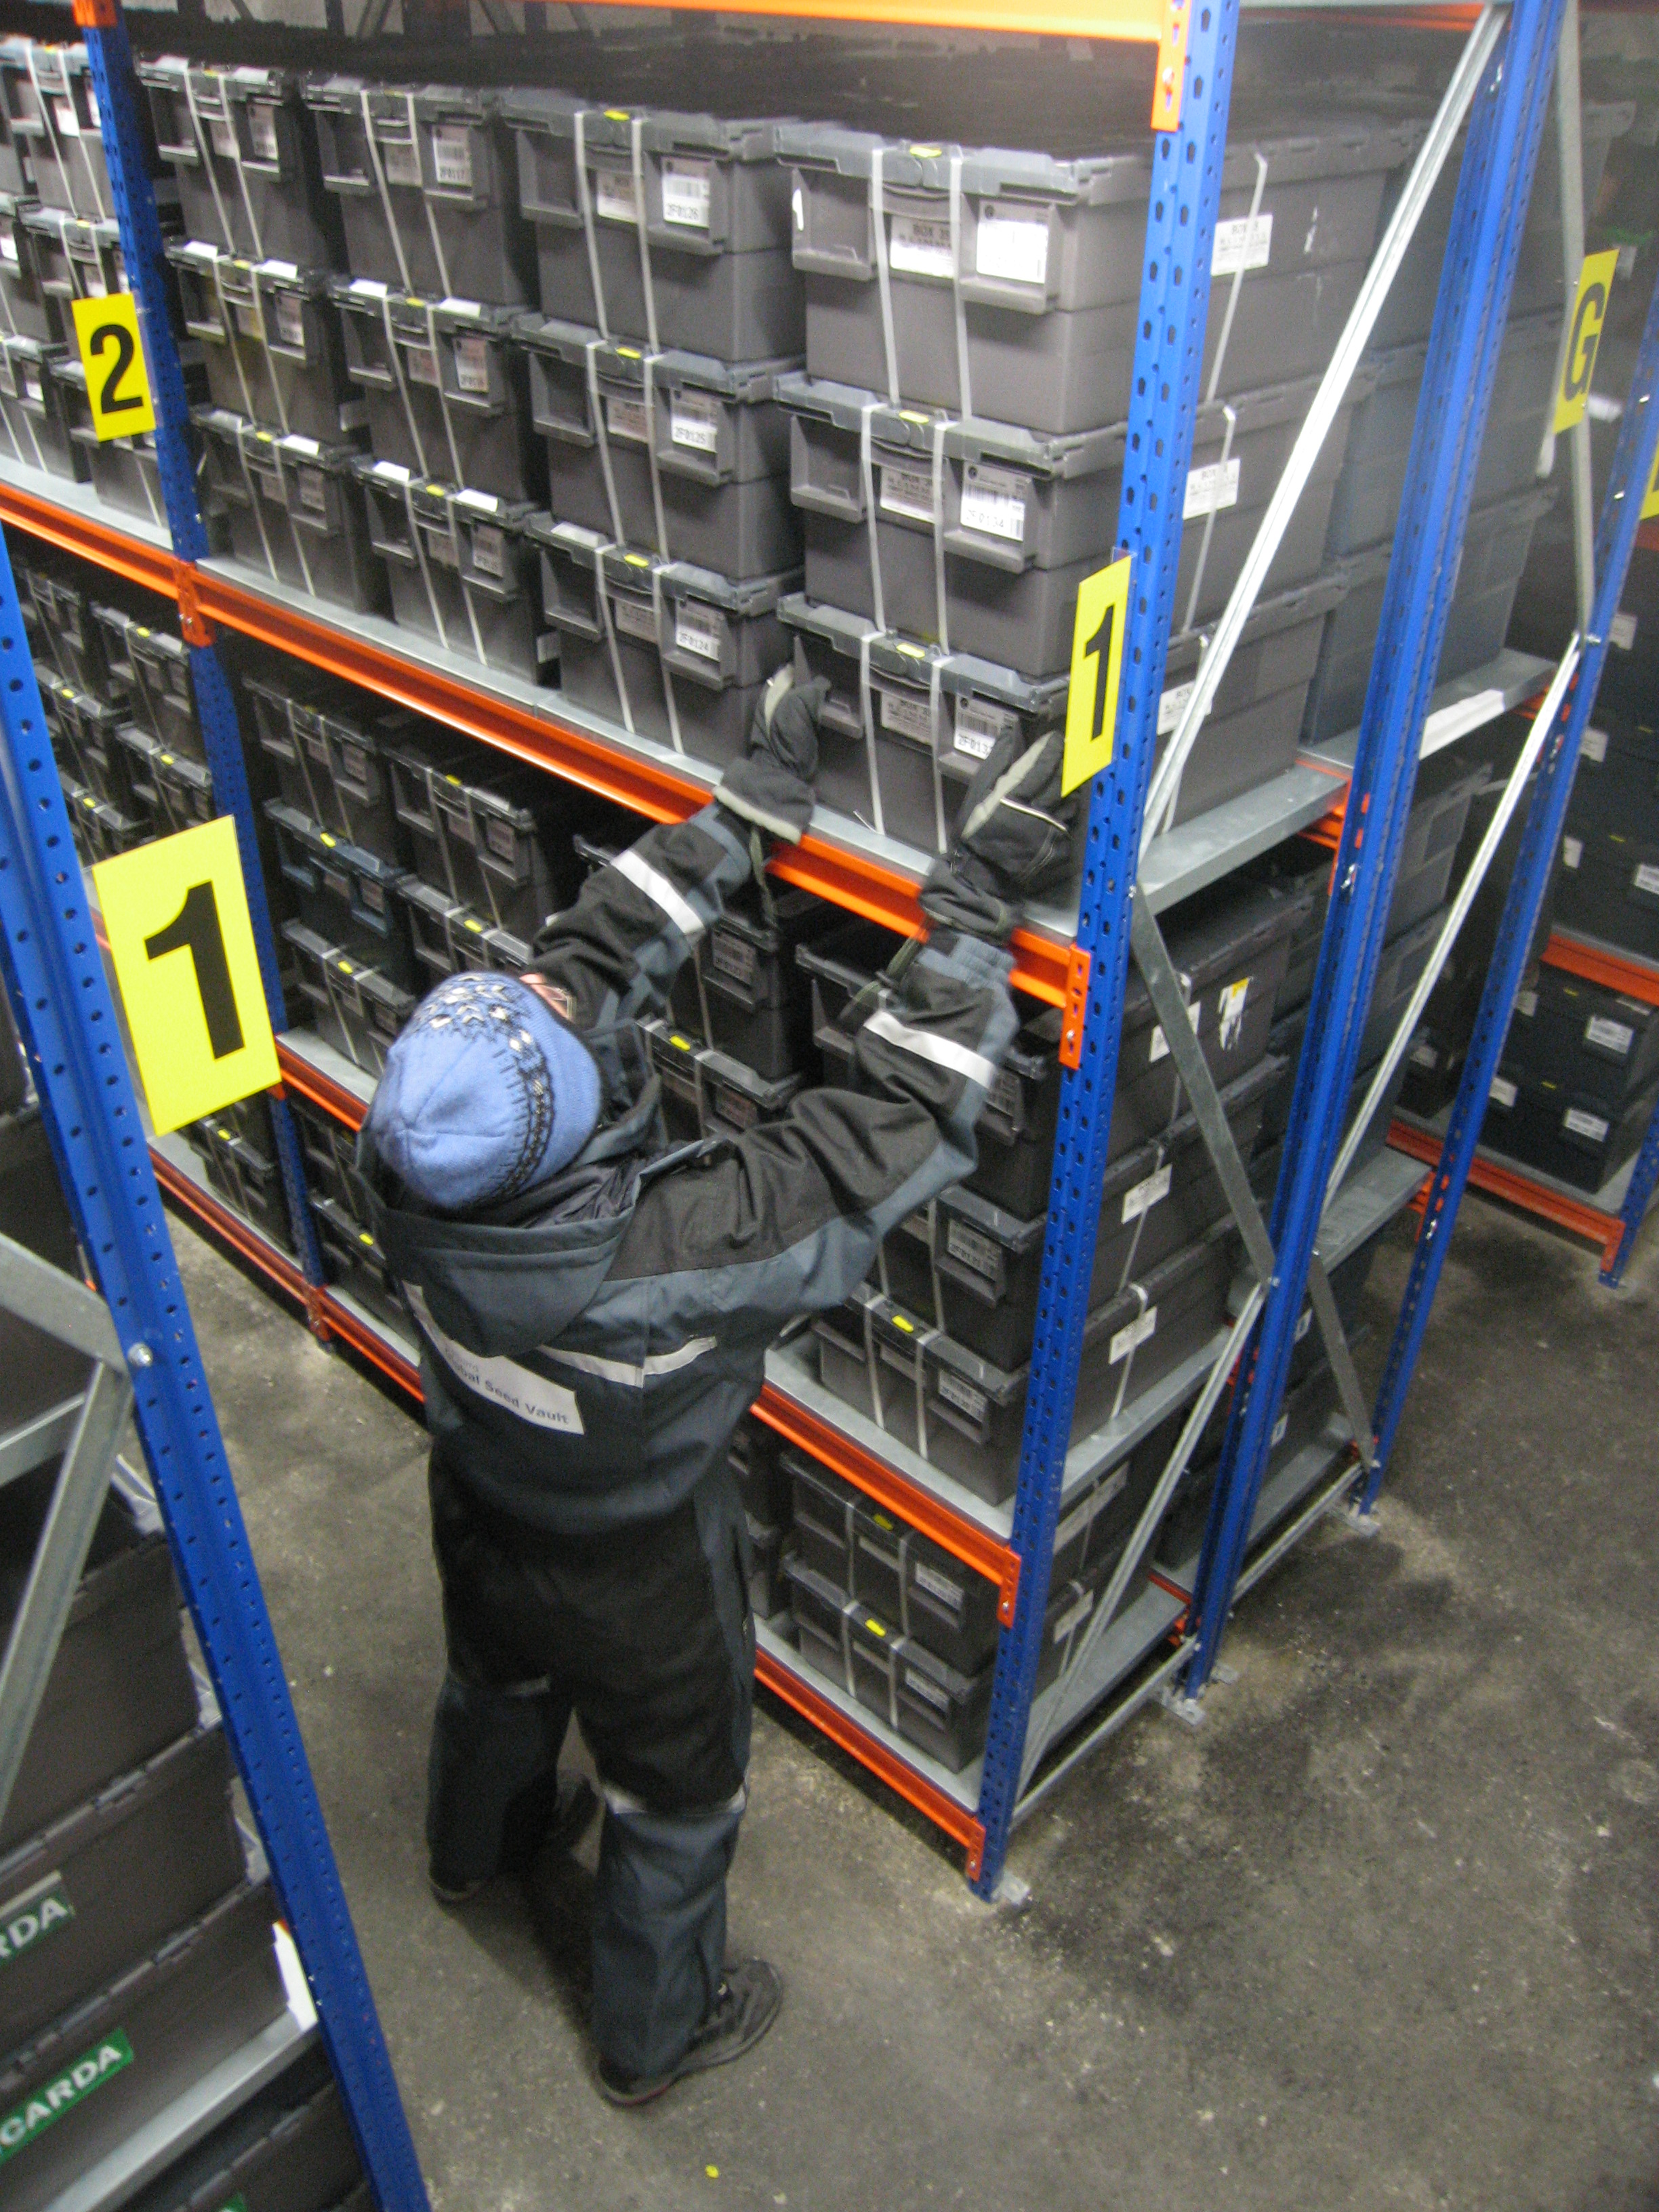 File Storage Containers In Svalbard Global Seed Vault 01 Jpg Wikimedia Commons